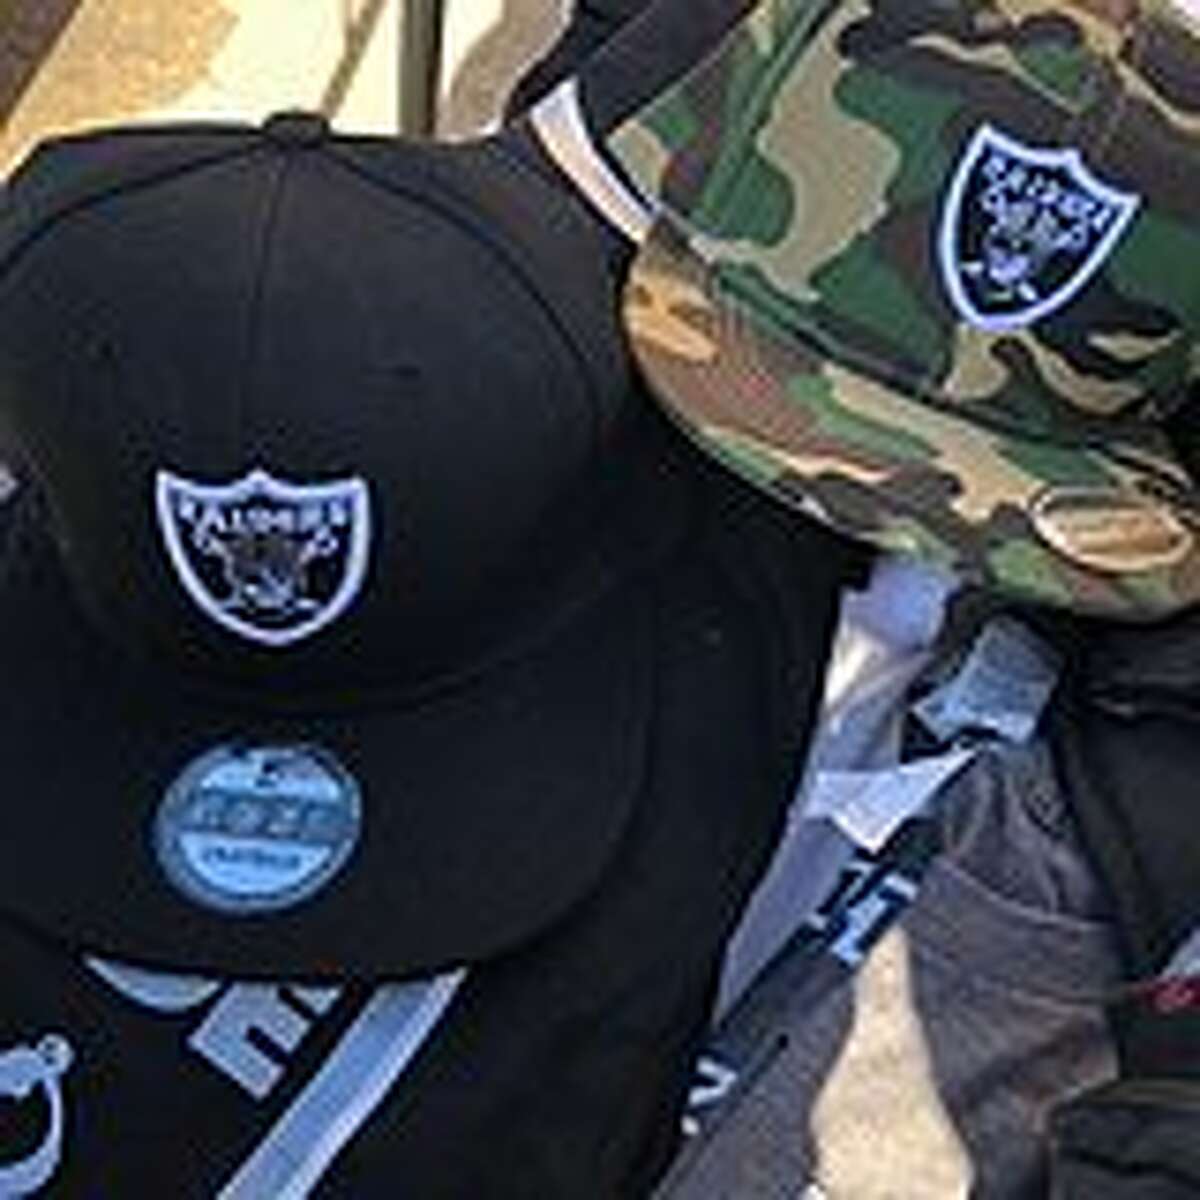 ICE agents raided last week's Raiders game, finding $11,000 in unauthorized NFL merchandise.